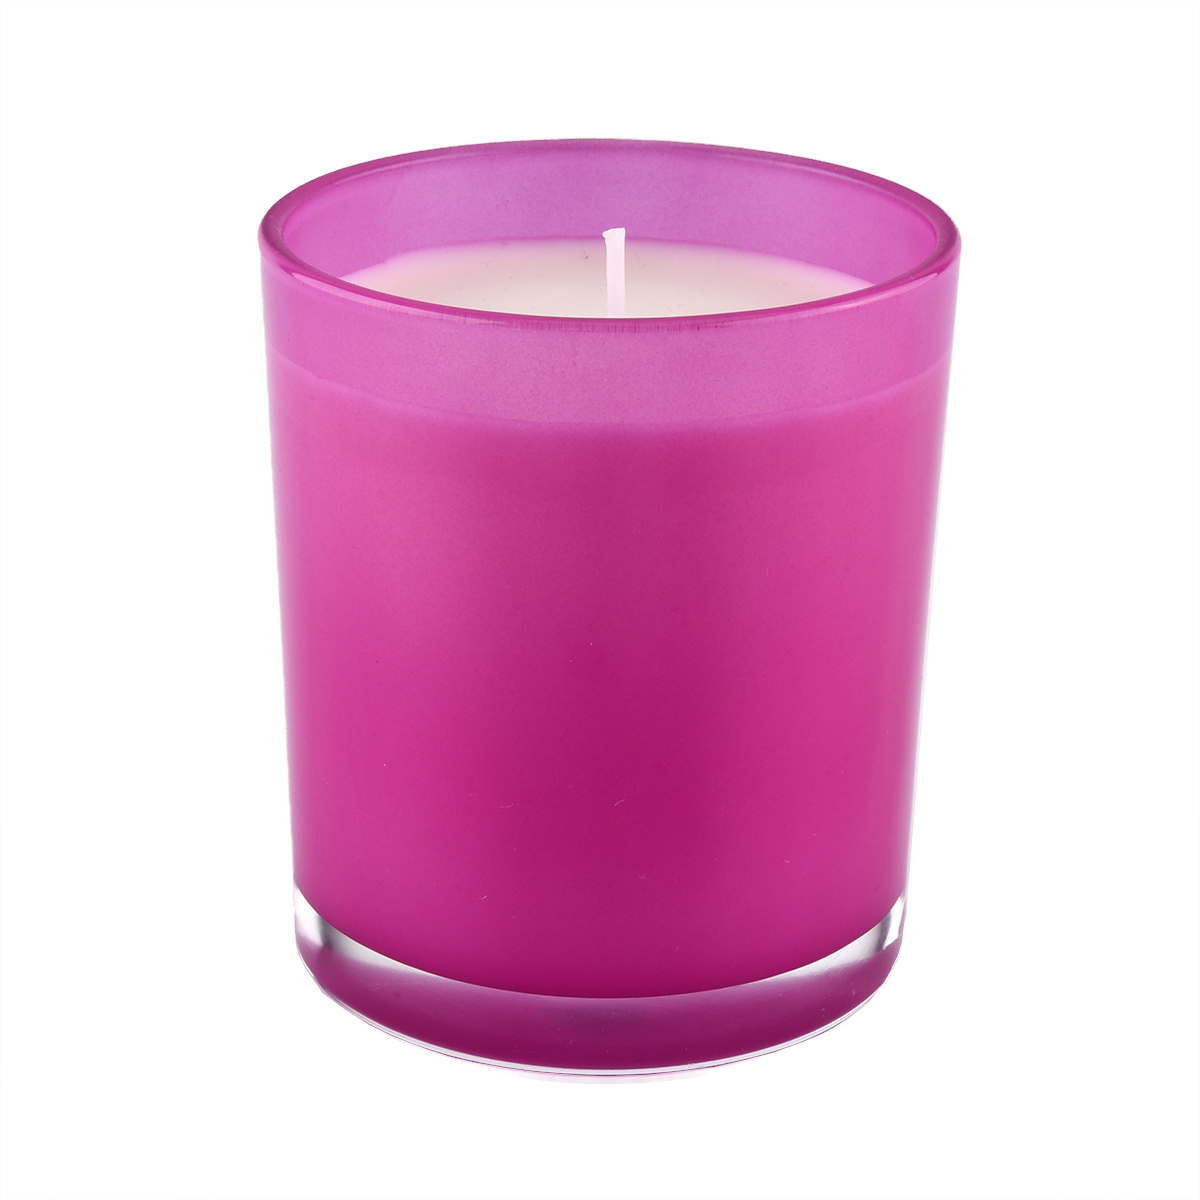 Translucent Luxury Ombre Pink Candle Jar